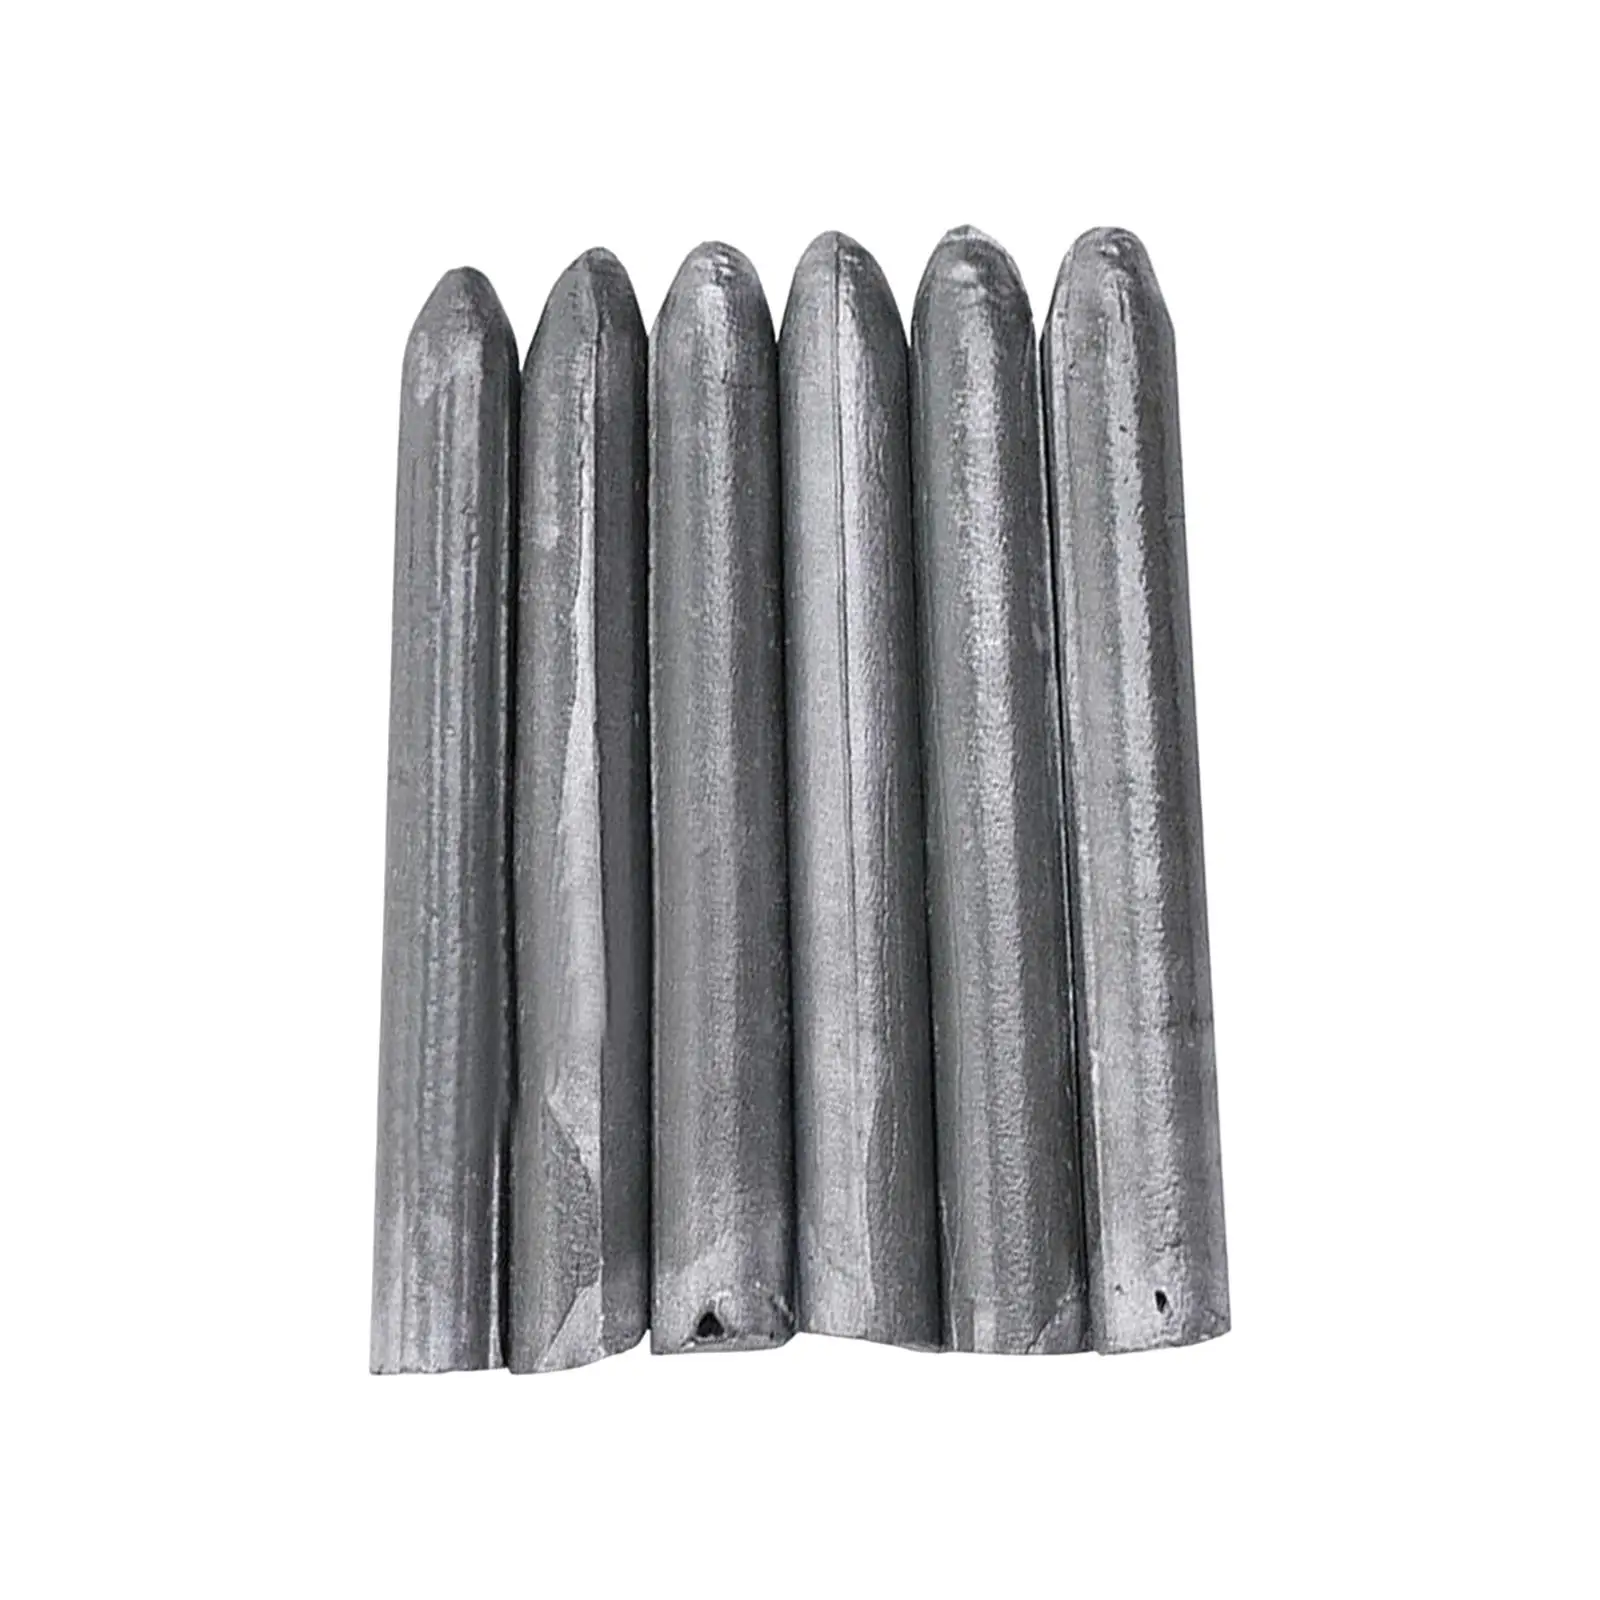 Welding Rods Low Temperature Easily Melt Core Rod for Stainless Steel